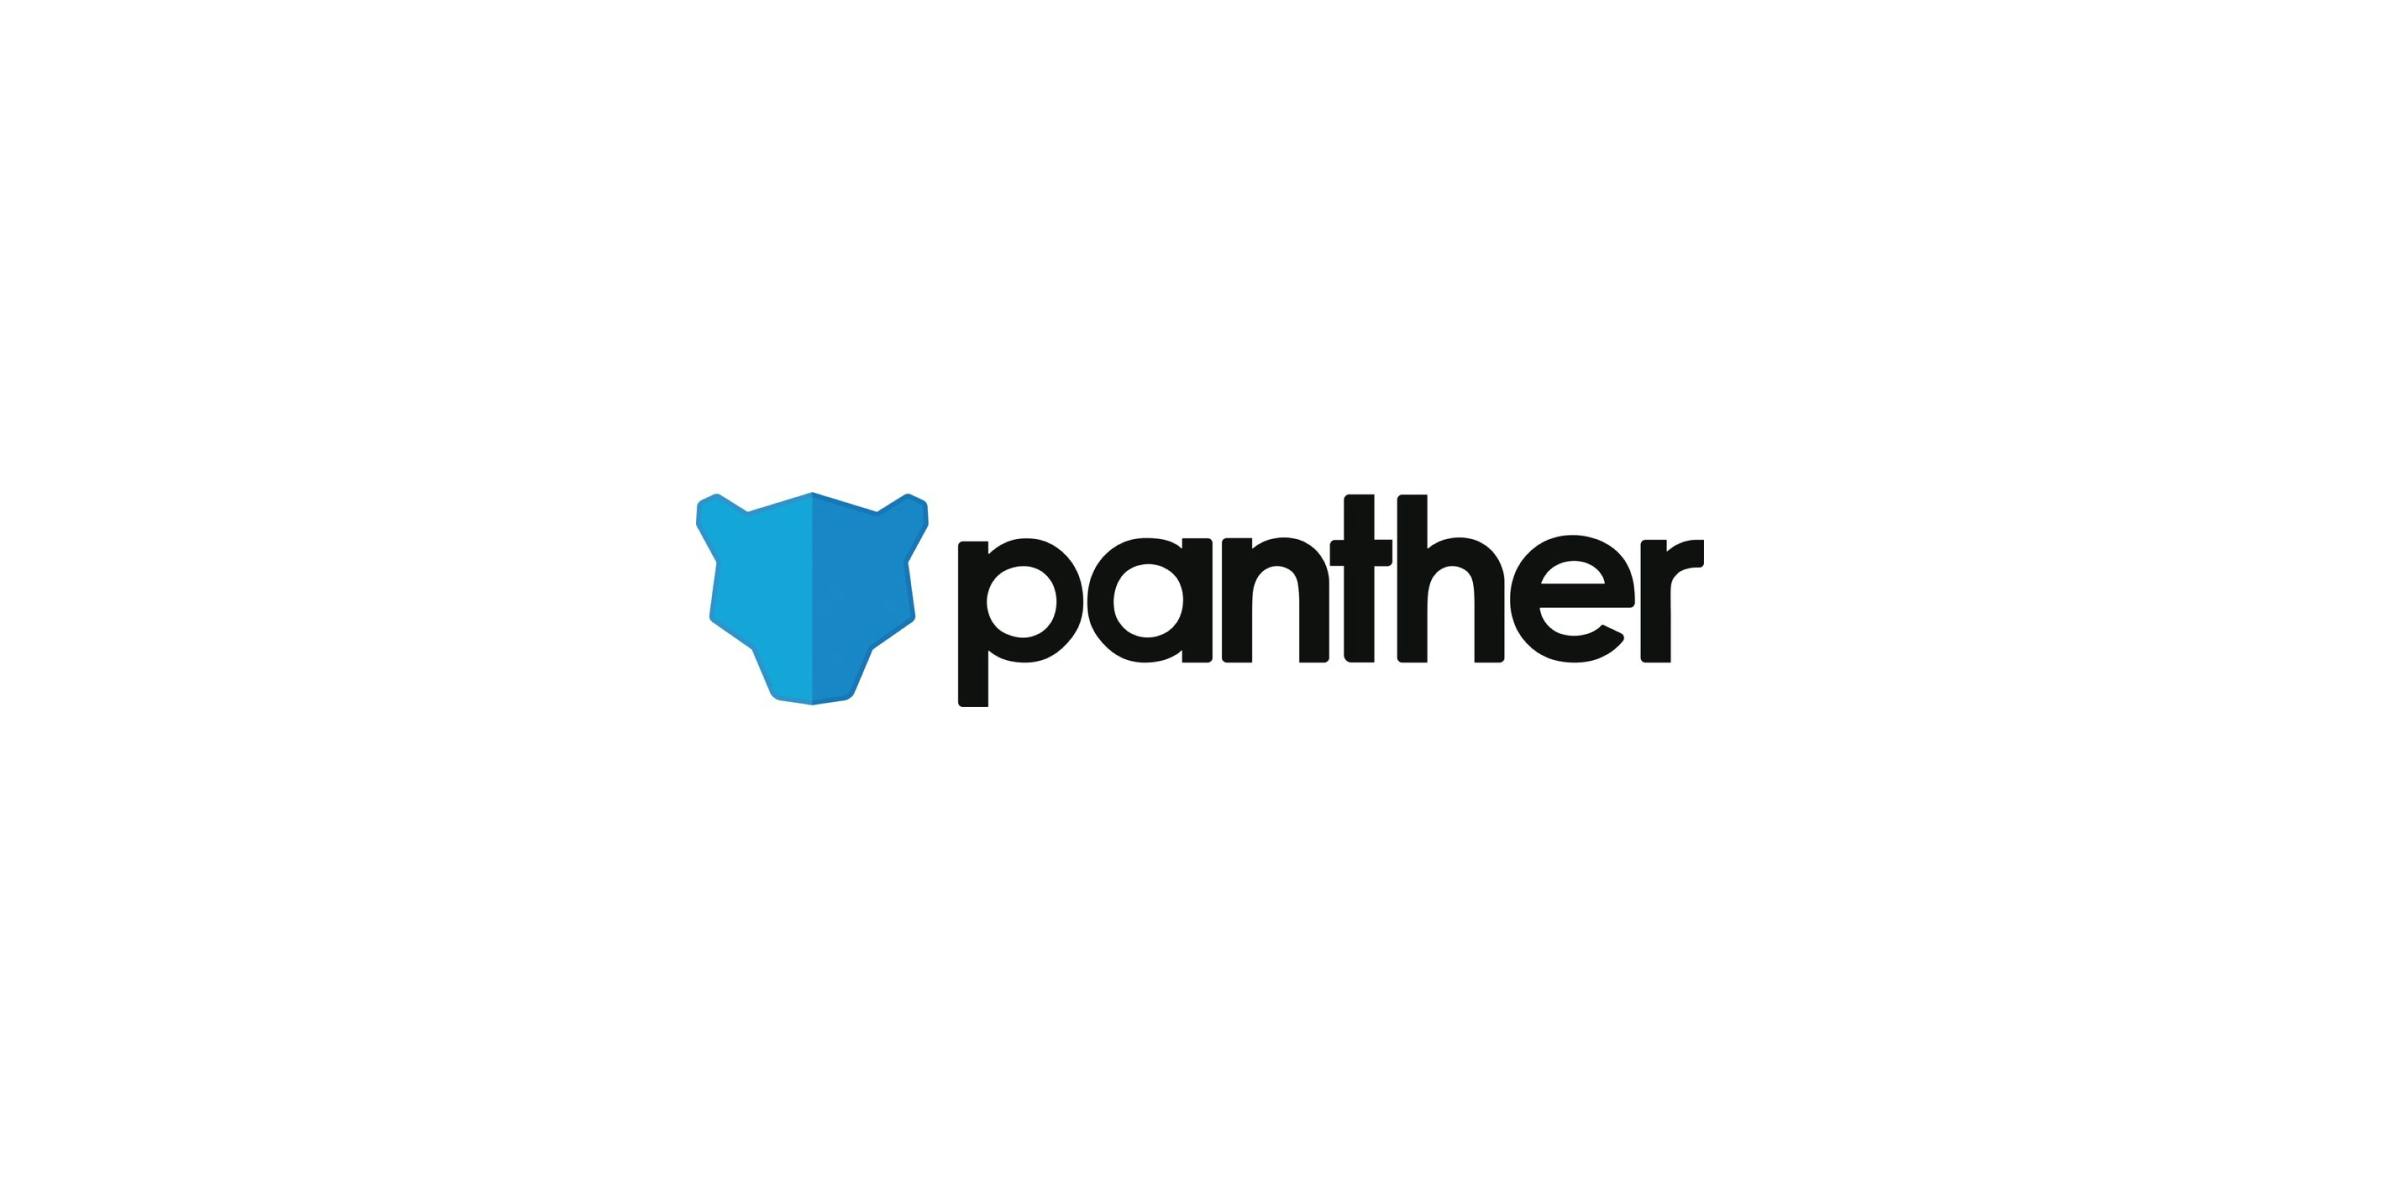 Report: Panther's Business Breakdown & Founding Story